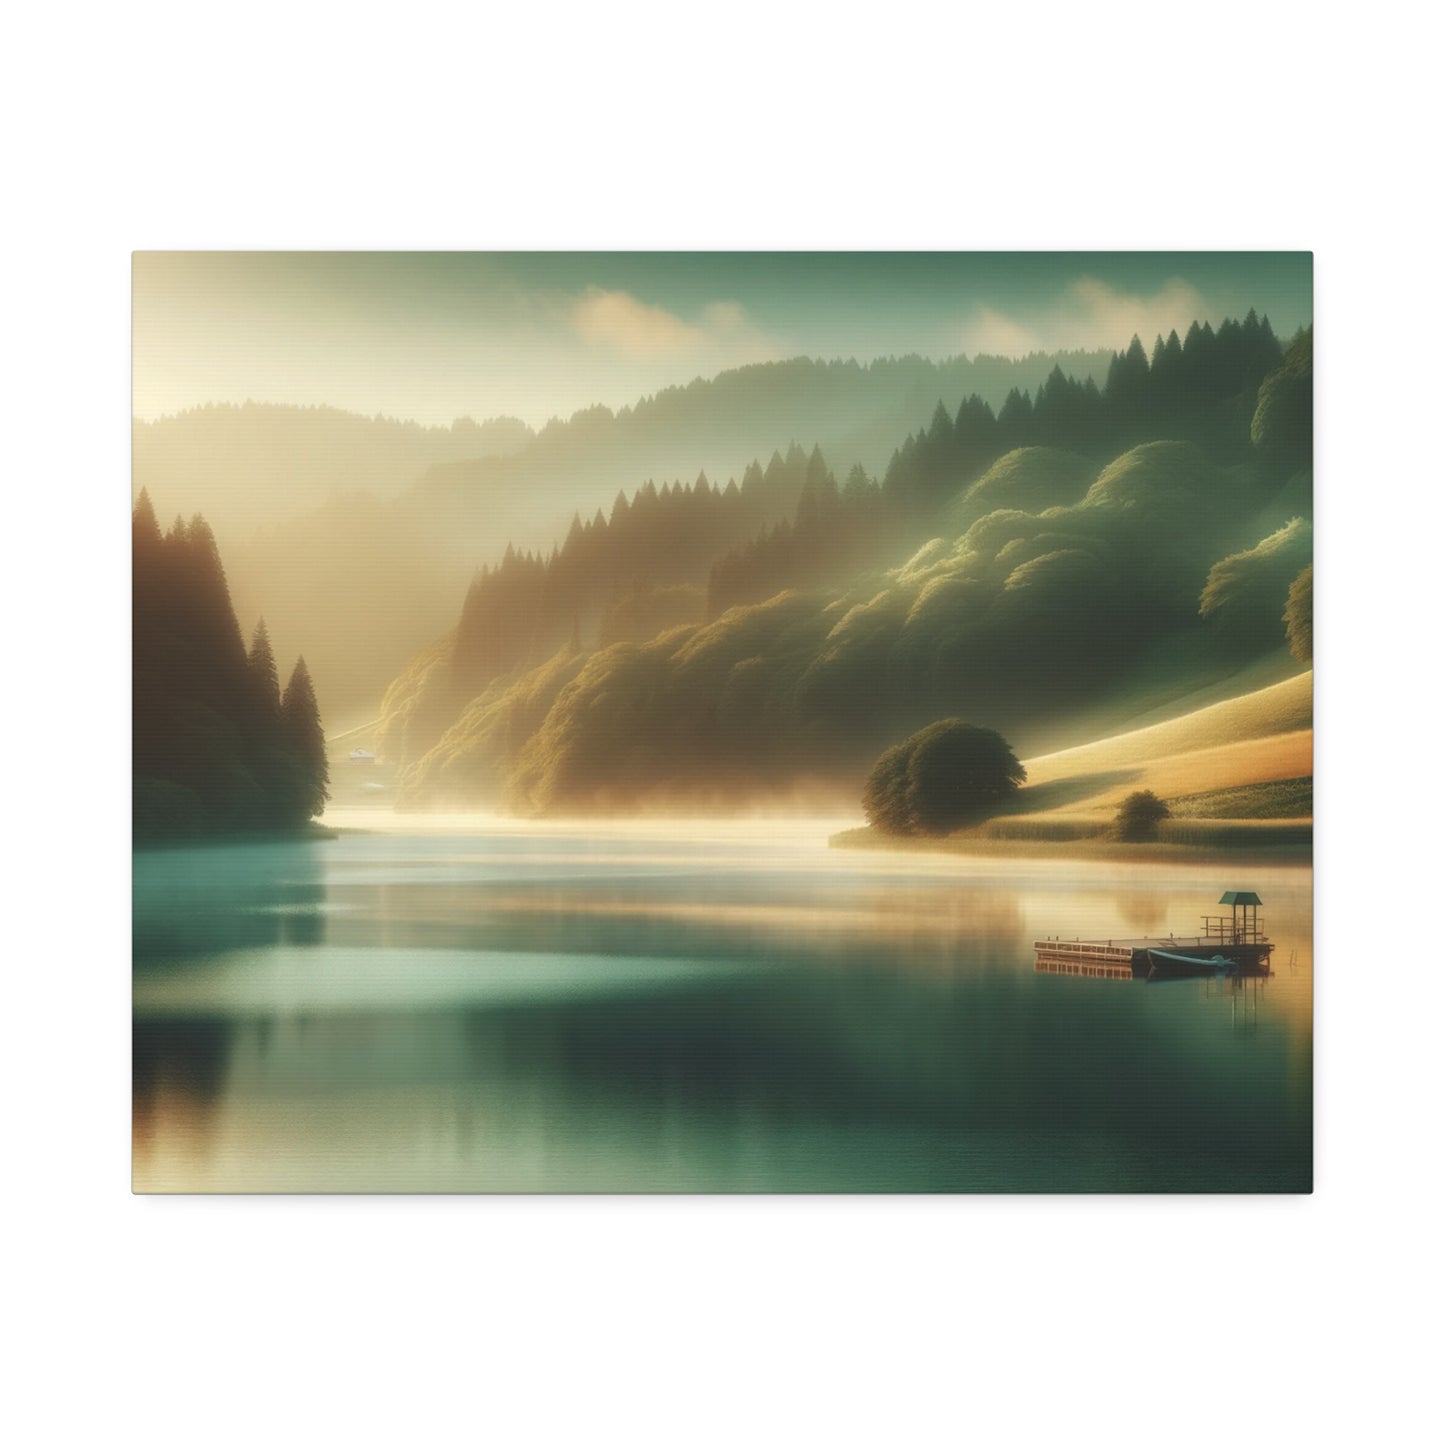 Dawn's Tranquility: Peaceful Lakeside Morning Artwork